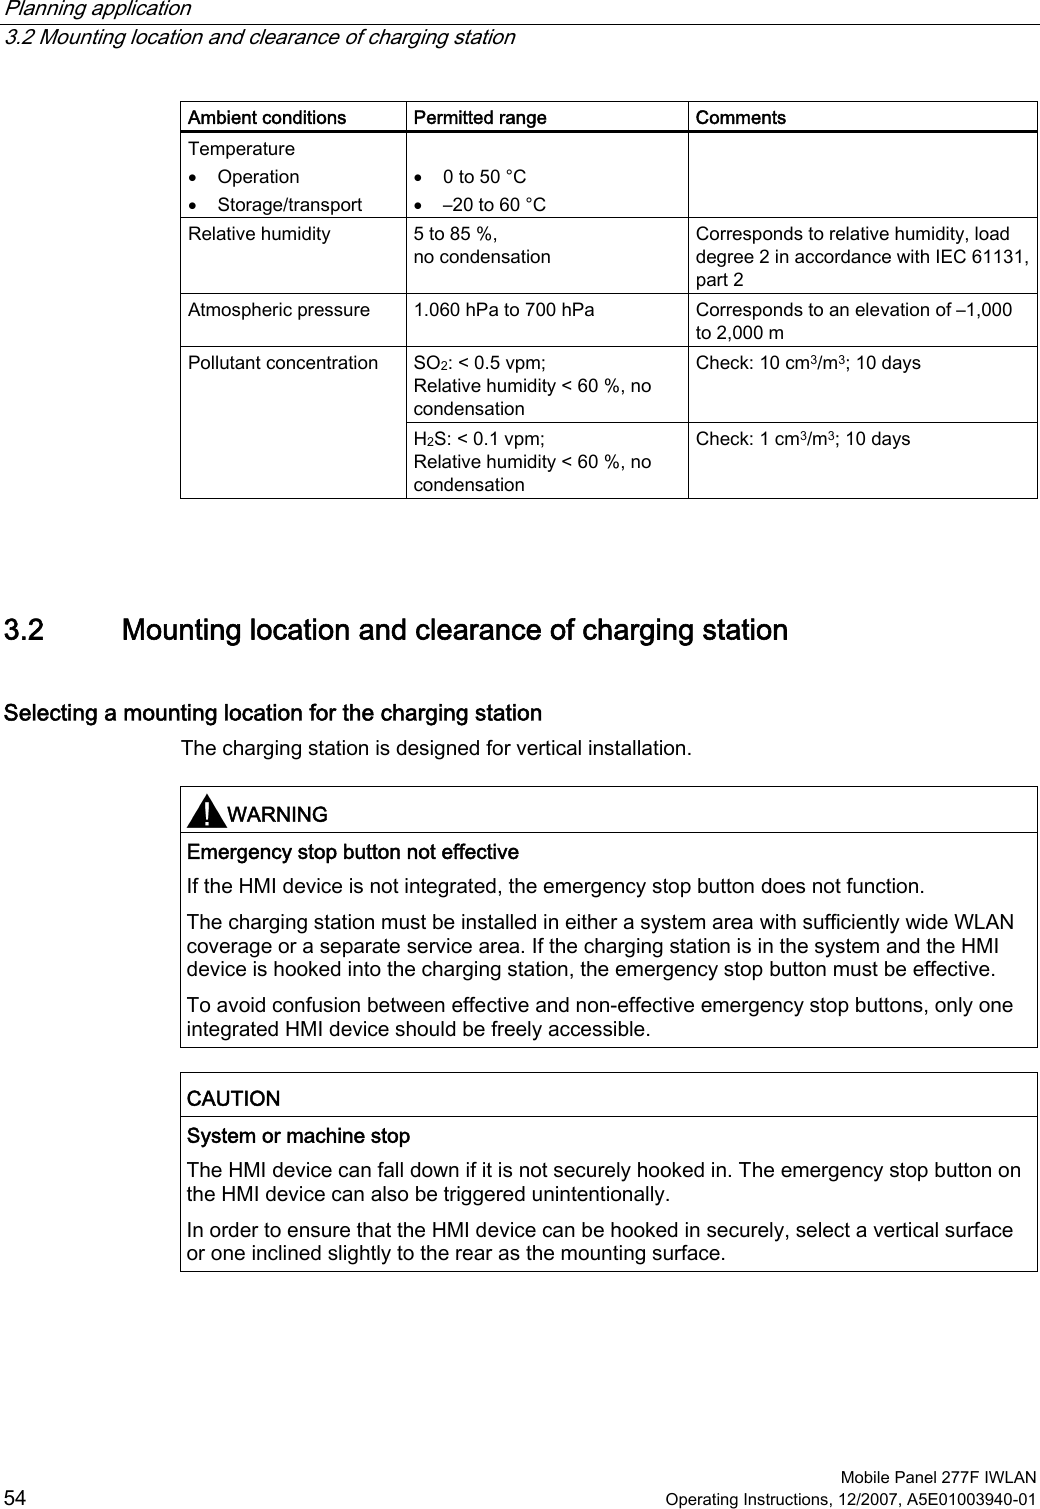 Planning application   3.2 Mounting location and clearance of charging station  Mobile Panel 277F IWLAN 54 Operating Instructions, 12/2007, A5E01003940-01 Ambient conditions   Permitted range   Comments Temperature • Operation • Storage/transport  • 0 to 50 °C • –20 to 60 °C  Relative humidity  5 to 85 %, no condensation Corresponds to relative humidity, load degree 2 in accordance with IEC 61131, part 2 Atmospheric pressure  1.060 hPa to 700 hPa  Corresponds to an elevation of –1,000 to 2,000 m SO2: &lt; 0.5 vpm;  Relative humidity &lt; 60 %, no condensation Check: 10 cm3/m3; 10 days Pollutant concentration H2S: &lt; 0.1 vpm;  Relative humidity &lt; 60 %, no condensation Check: 1 cm3/m3; 10 days  3.2 Mounting location and clearance of charging station Selecting a mounting location for the charging station The charging station is designed for vertical installation.  WARNING  Emergency stop button not effective If the HMI device is not integrated, the emergency stop button does not function.  The charging station must be installed in either a system area with sufficiently wide WLAN coverage or a separate service area. If the charging station is in the system and the HMI device is hooked into the charging station, the emergency stop button must be effective. To avoid confusion between effective and non-effective emergency stop buttons, only one integrated HMI device should be freely accessible.  CAUTION  System or machine stop The HMI device can fall down if it is not securely hooked in. The emergency stop button on the HMI device can also be triggered unintentionally. In order to ensure that the HMI device can be hooked in securely, select a vertical surface or one inclined slightly to the rear as the mounting surface.  